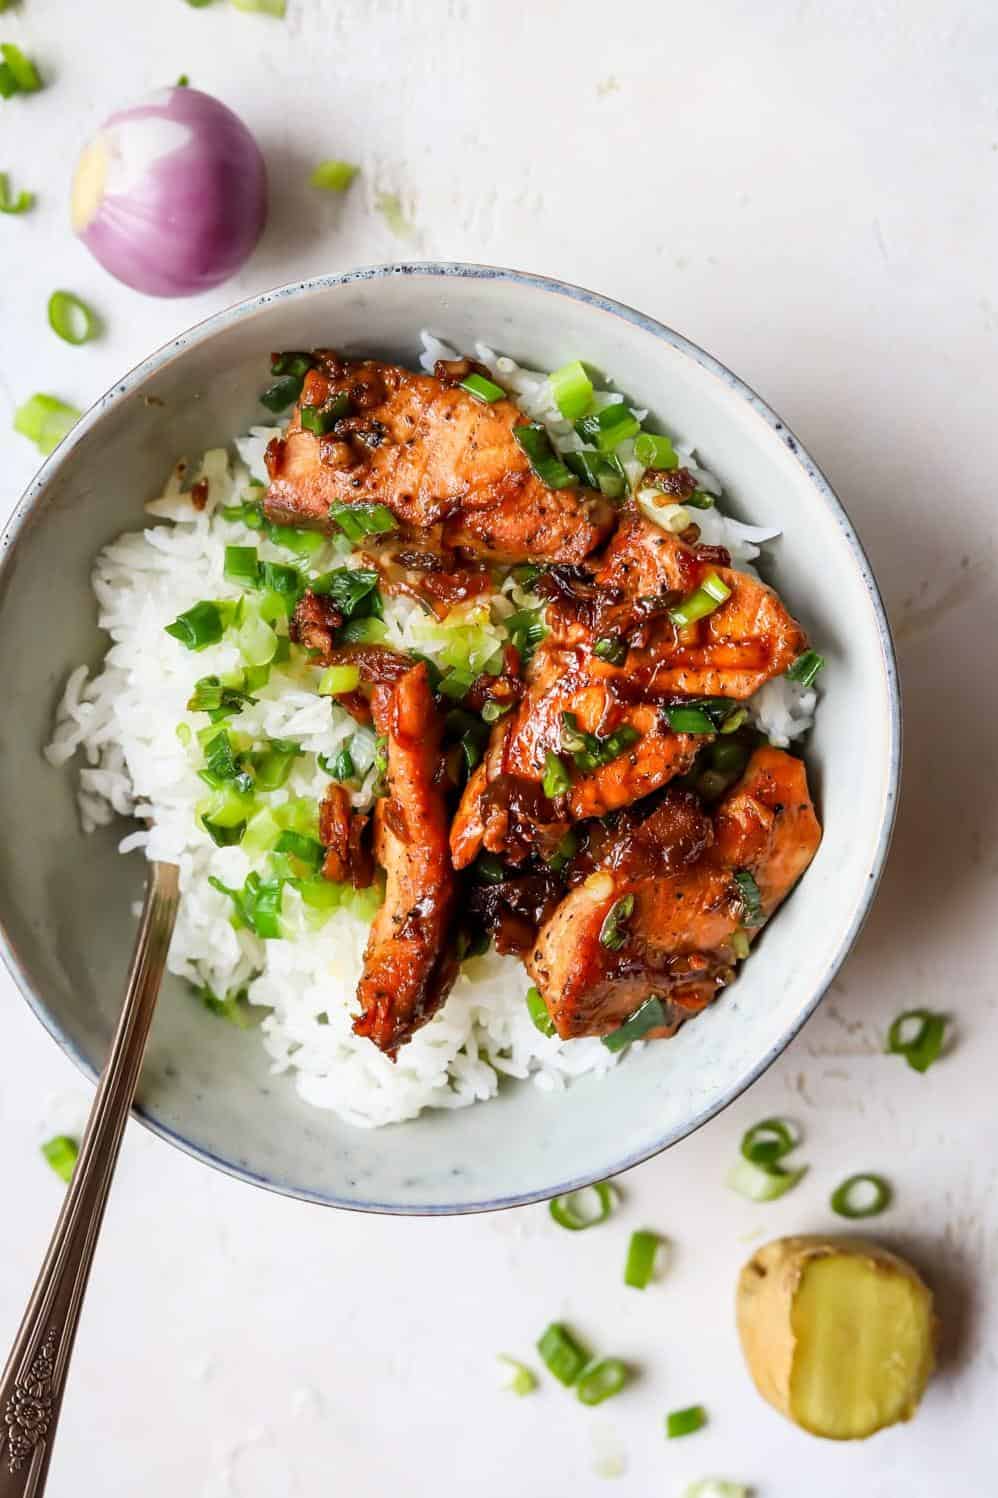  From sea to saucepan, this salmon dish is a must-try